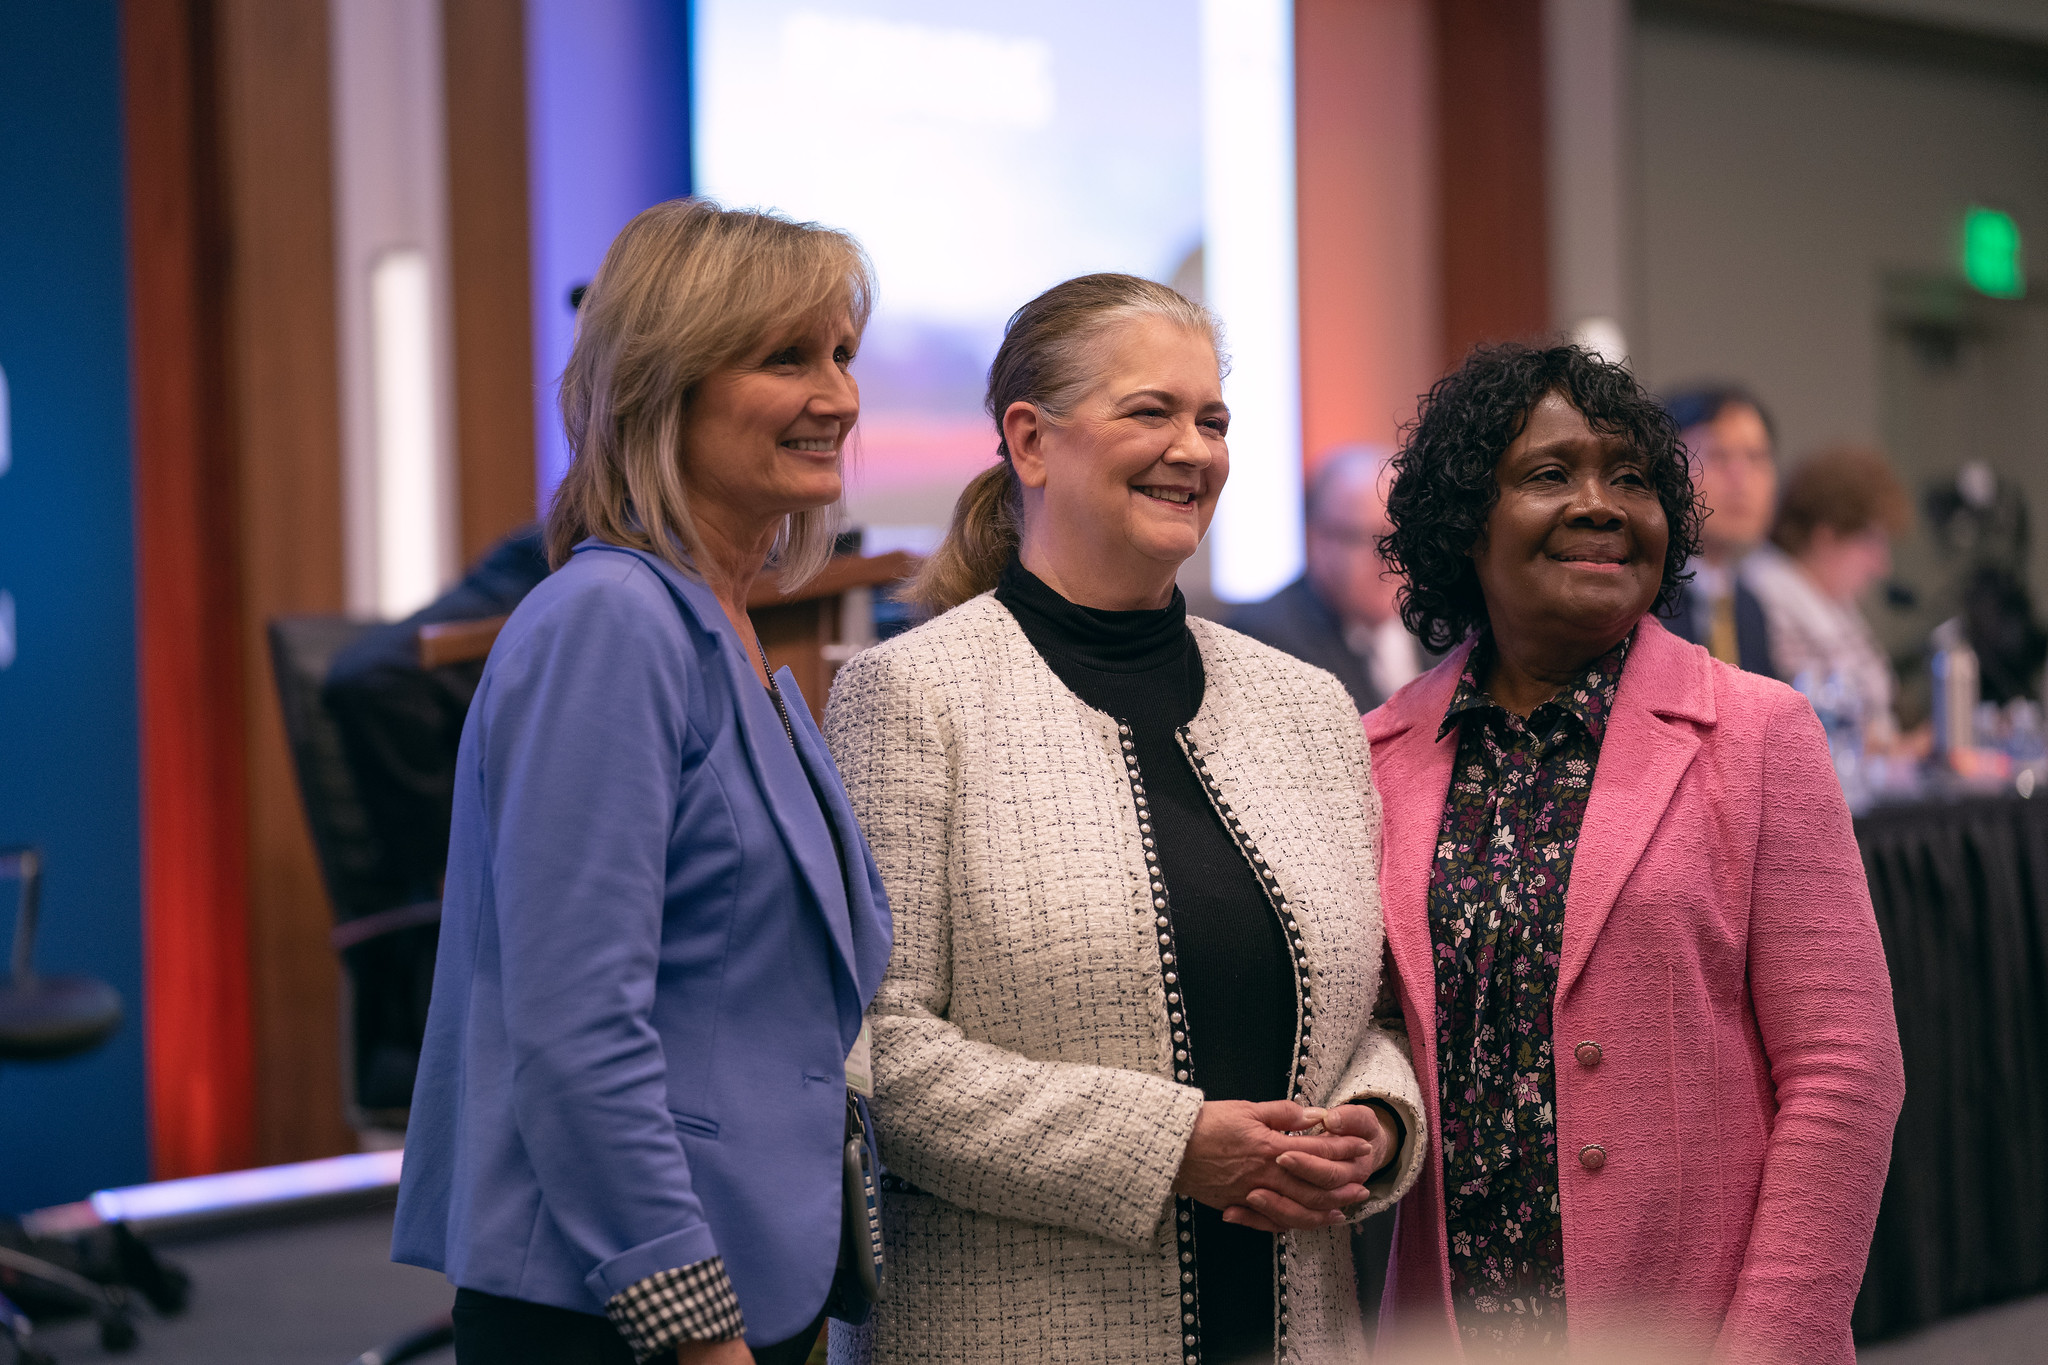 Debra Brill poses with Bonita Joyner Shields, NAD associate secretary, and Ella Simmons, former General Conference vice president at the North American Division Year-End Meeting in 2019